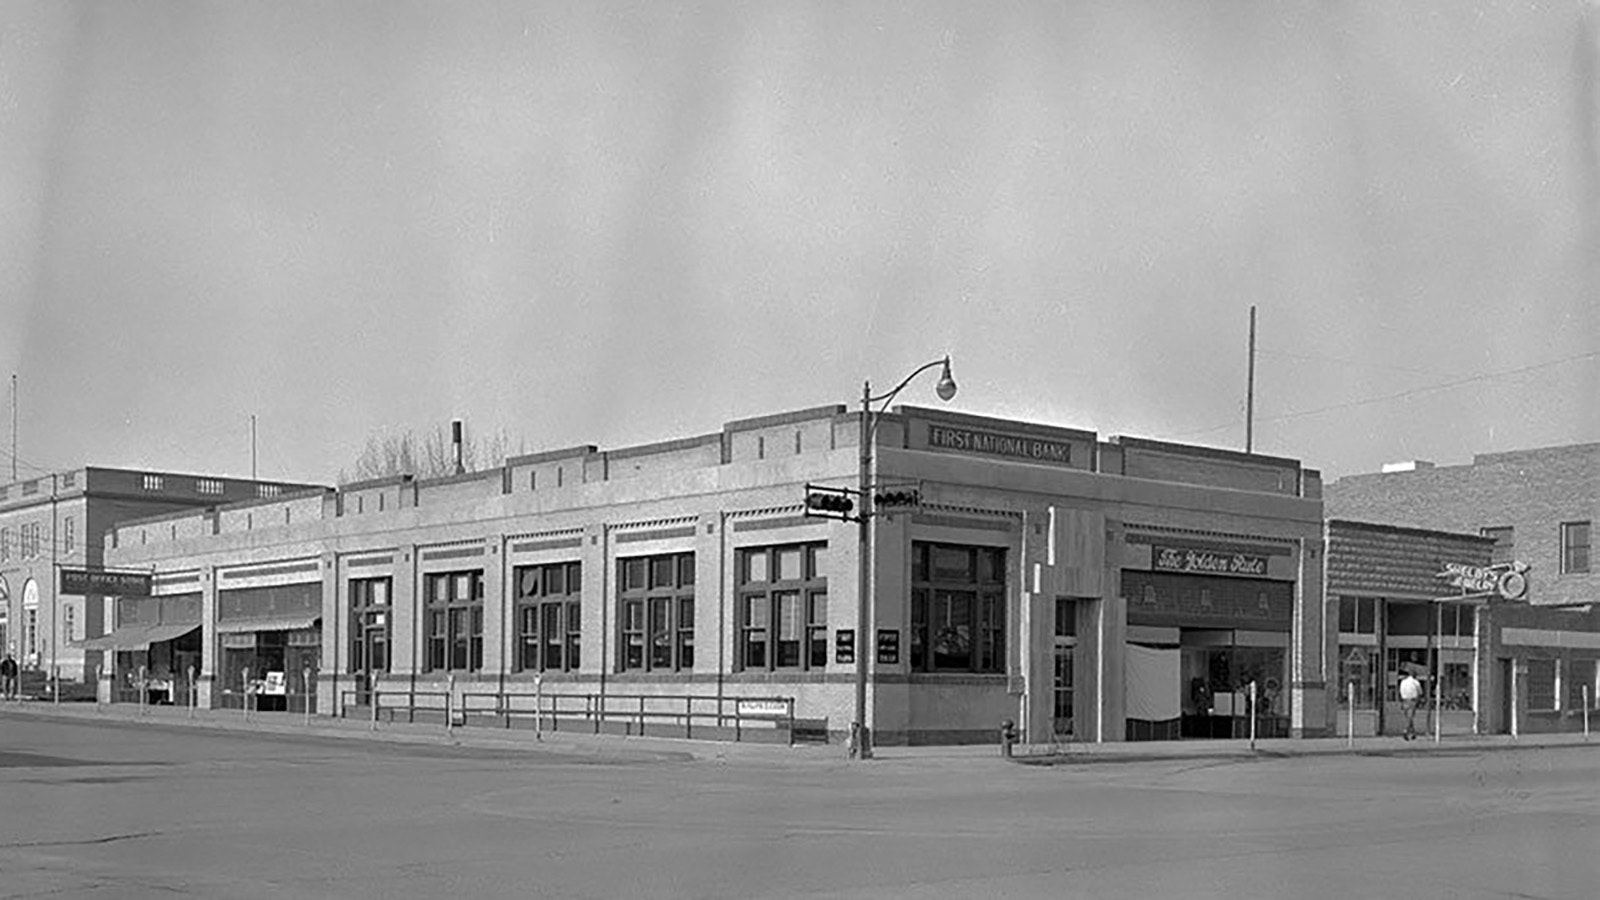 Cody's historic First National Bank in the 1950s. It was the focus of a sensational robbery and gunfight in Cody on Nov. 1, 1904.